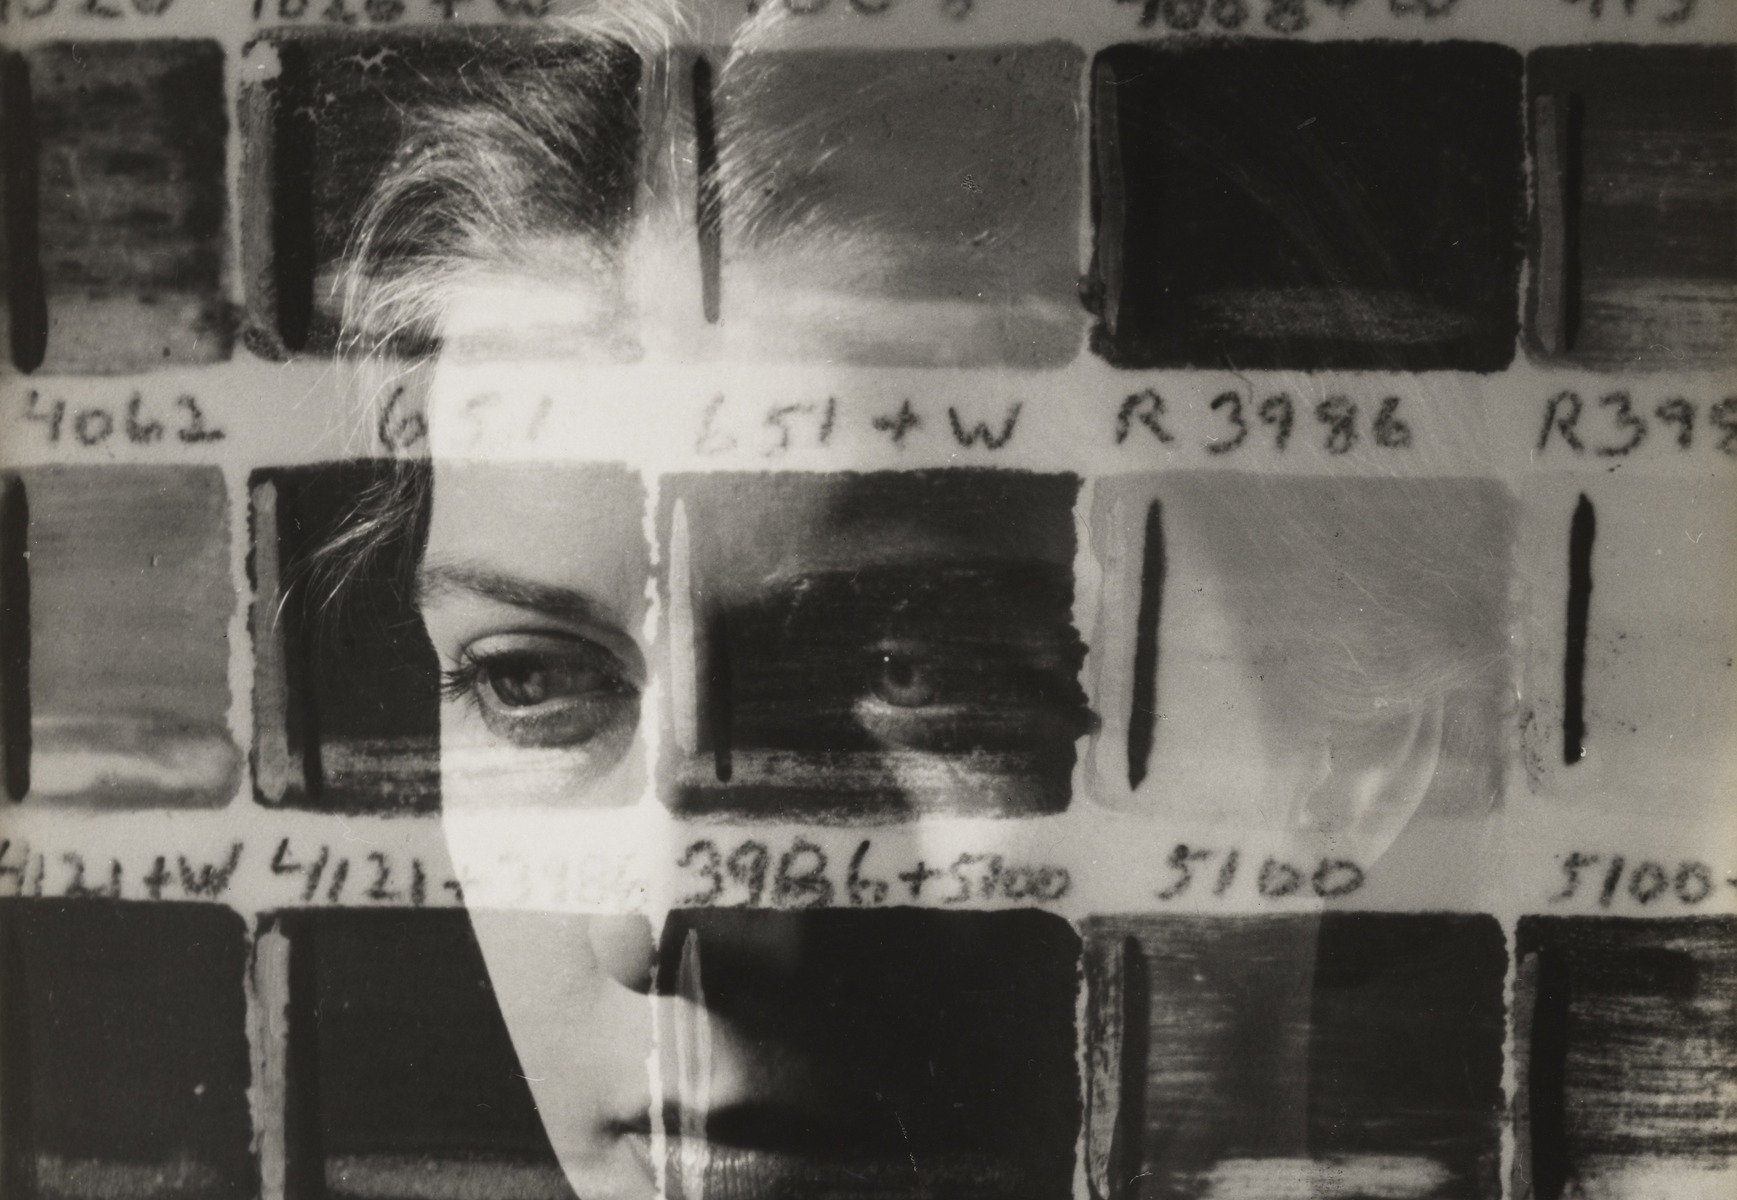 Photographic portrait of Carol Janeway by Maya Daren is a black-and-white photograph of a young white woman's face. The portrait is overlaid with a grid of smaller rectangles, making it look like a contact sheet. The is unsmiling and stares off into the distance.